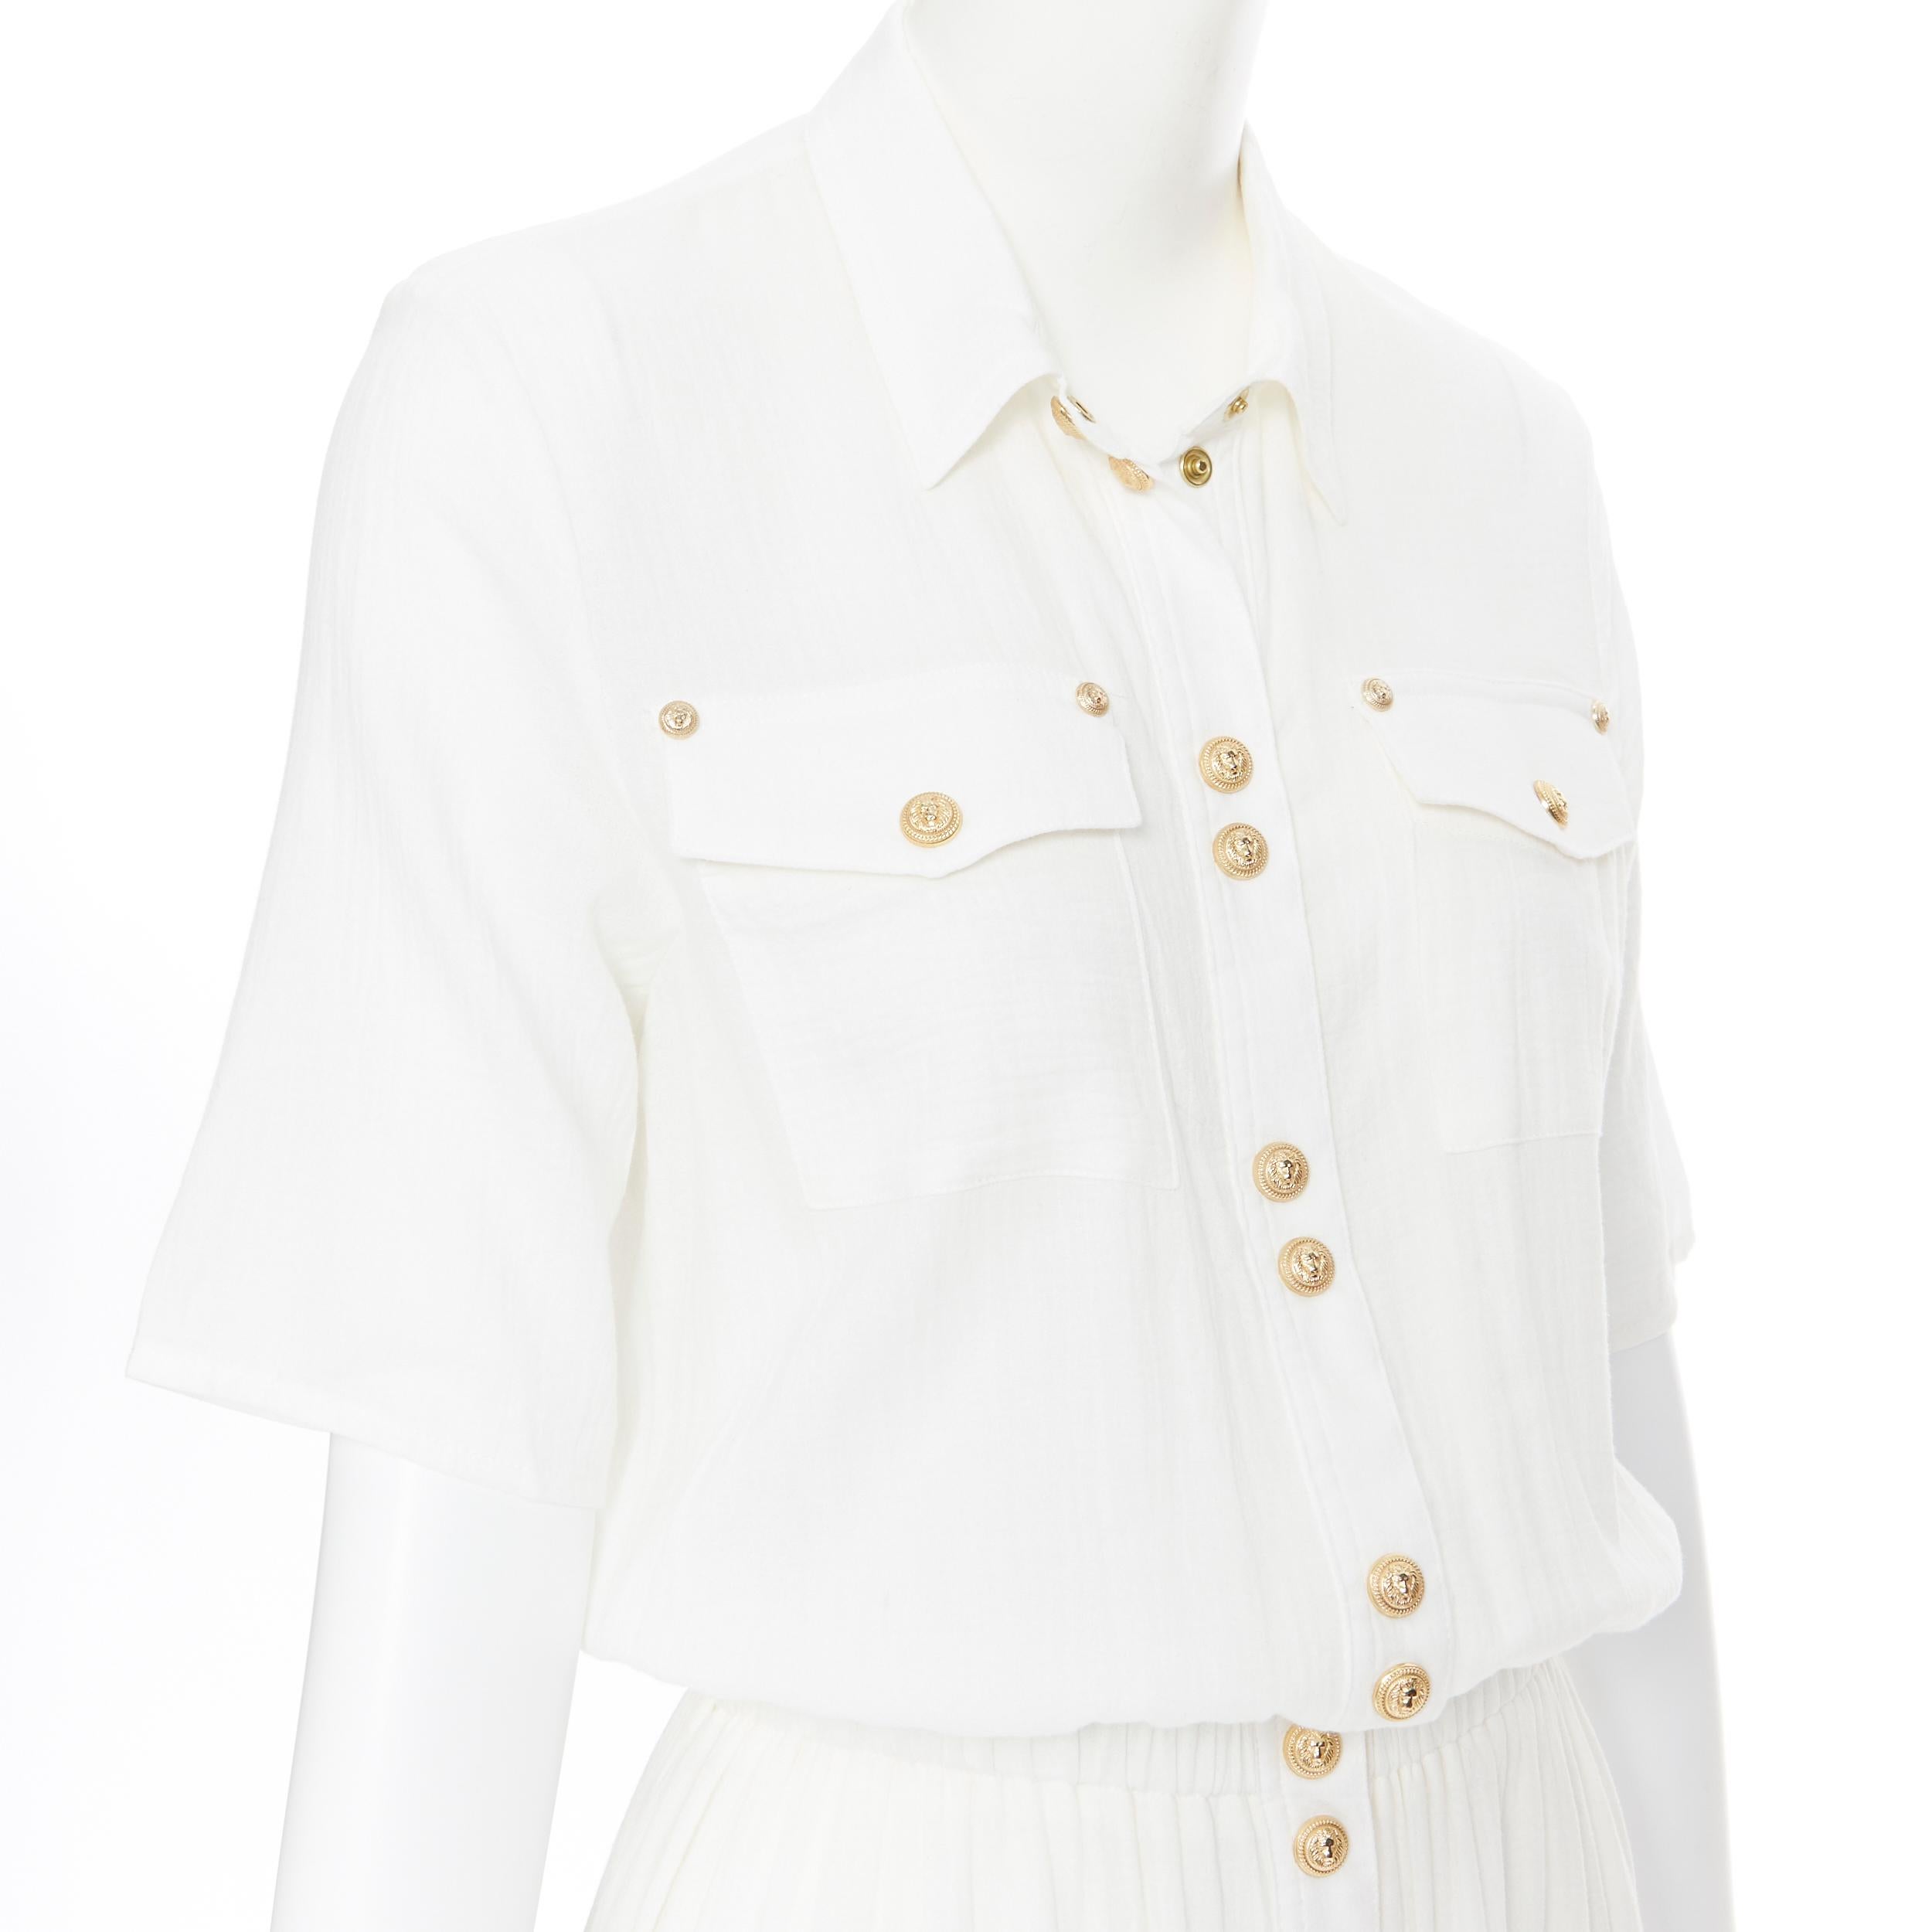 new BALMAIN white fine cotton gold military button cinched waist maxi dress FR34
Brand: Balmain
Designer: Olivier Rousteing
Model Name / Style: Maxi dress
Material: Cotton
Color: White
Pattern: Solid
Closure: Button
Extra Detail: BALMAIN style code: